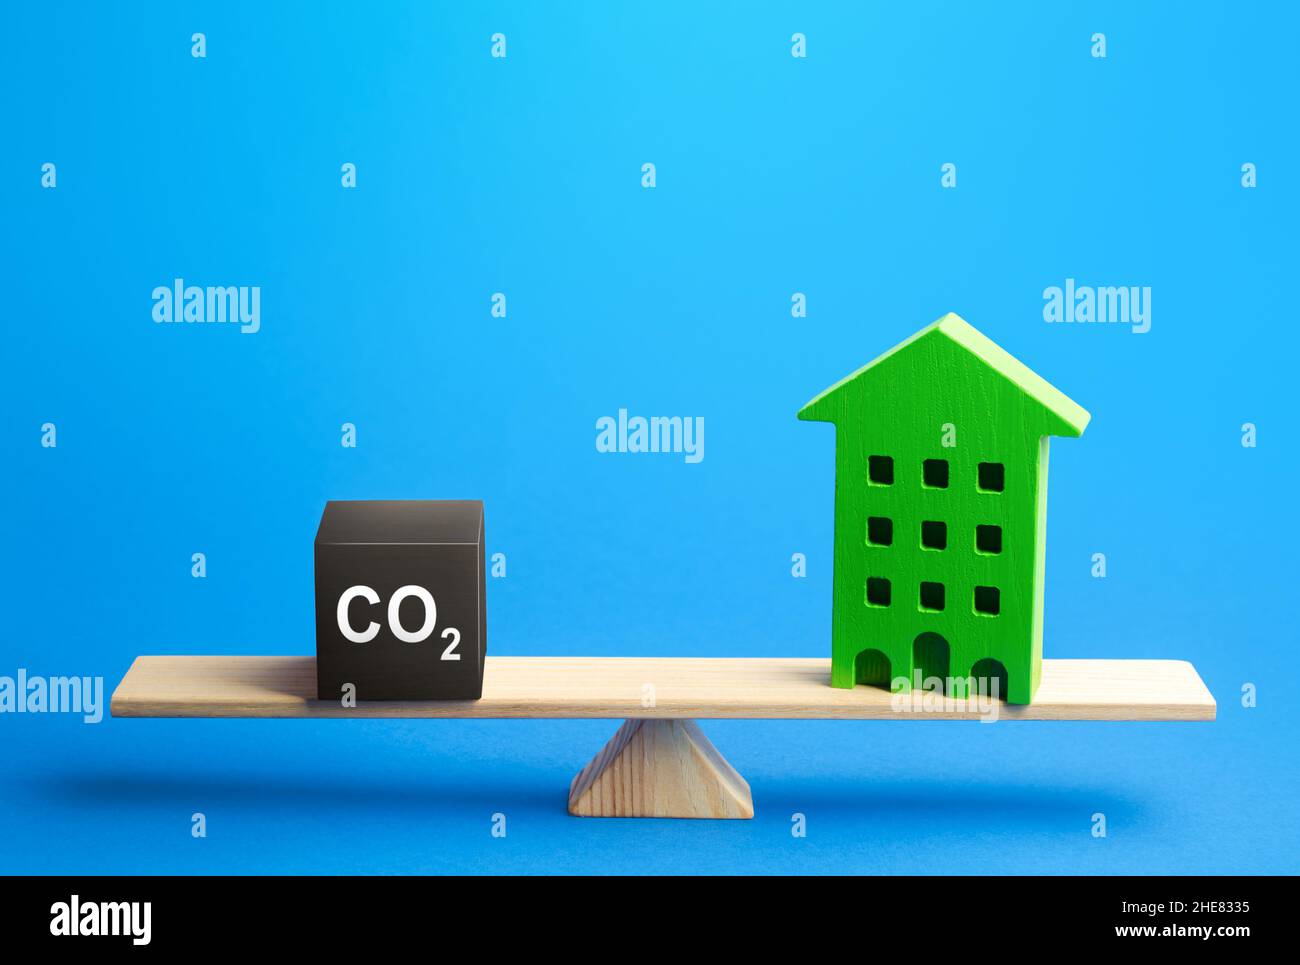 Residential building and CO2 emissions on scales. Greenhouse gas Emissions. Improving energy efficiency, lowering impact on environment. Decarbonizati Stock Photo